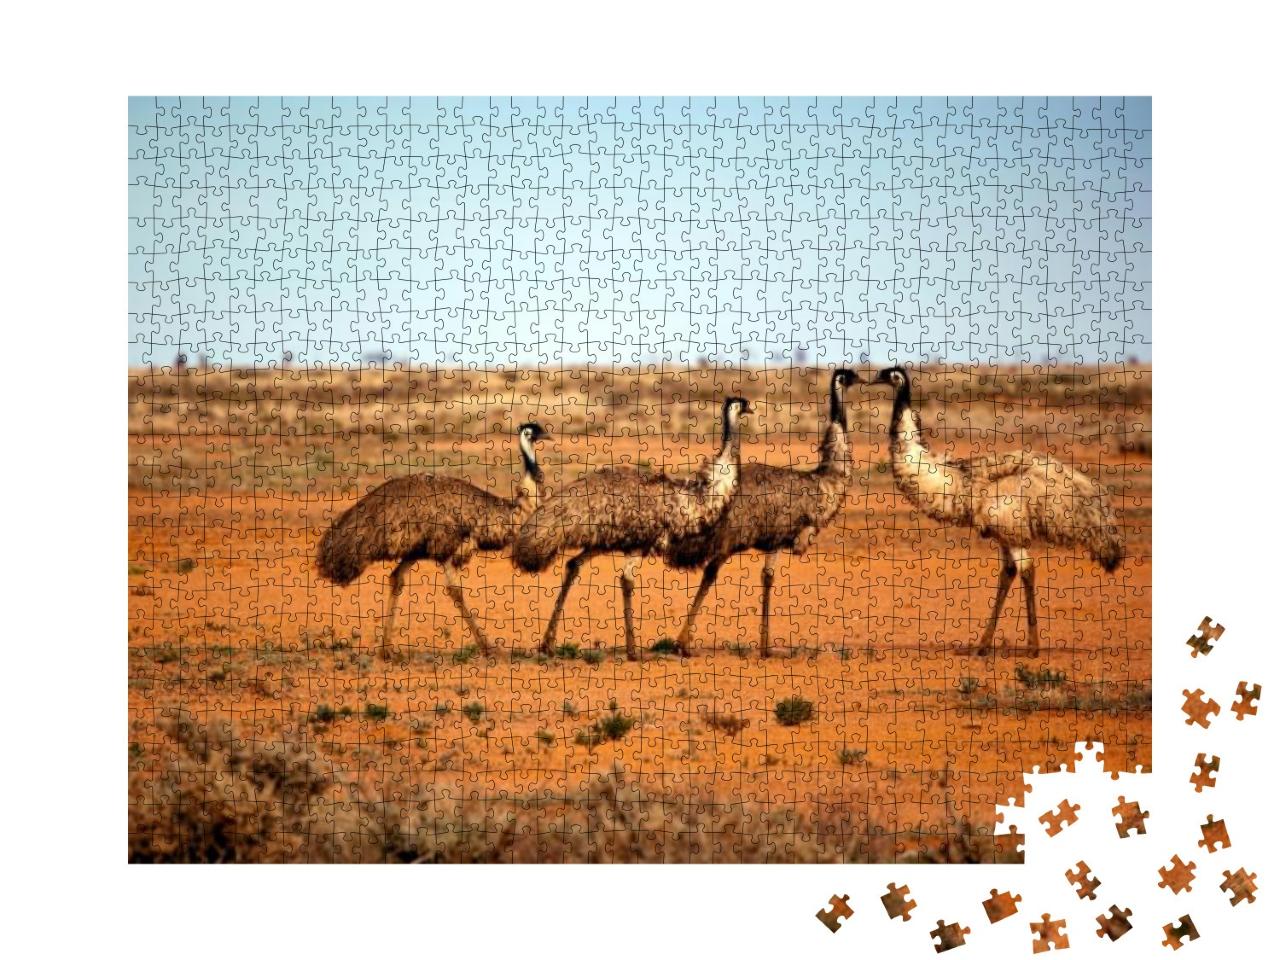 Emus in the Wild, Outback New South Wales, Australia... Jigsaw Puzzle with 1000 pieces